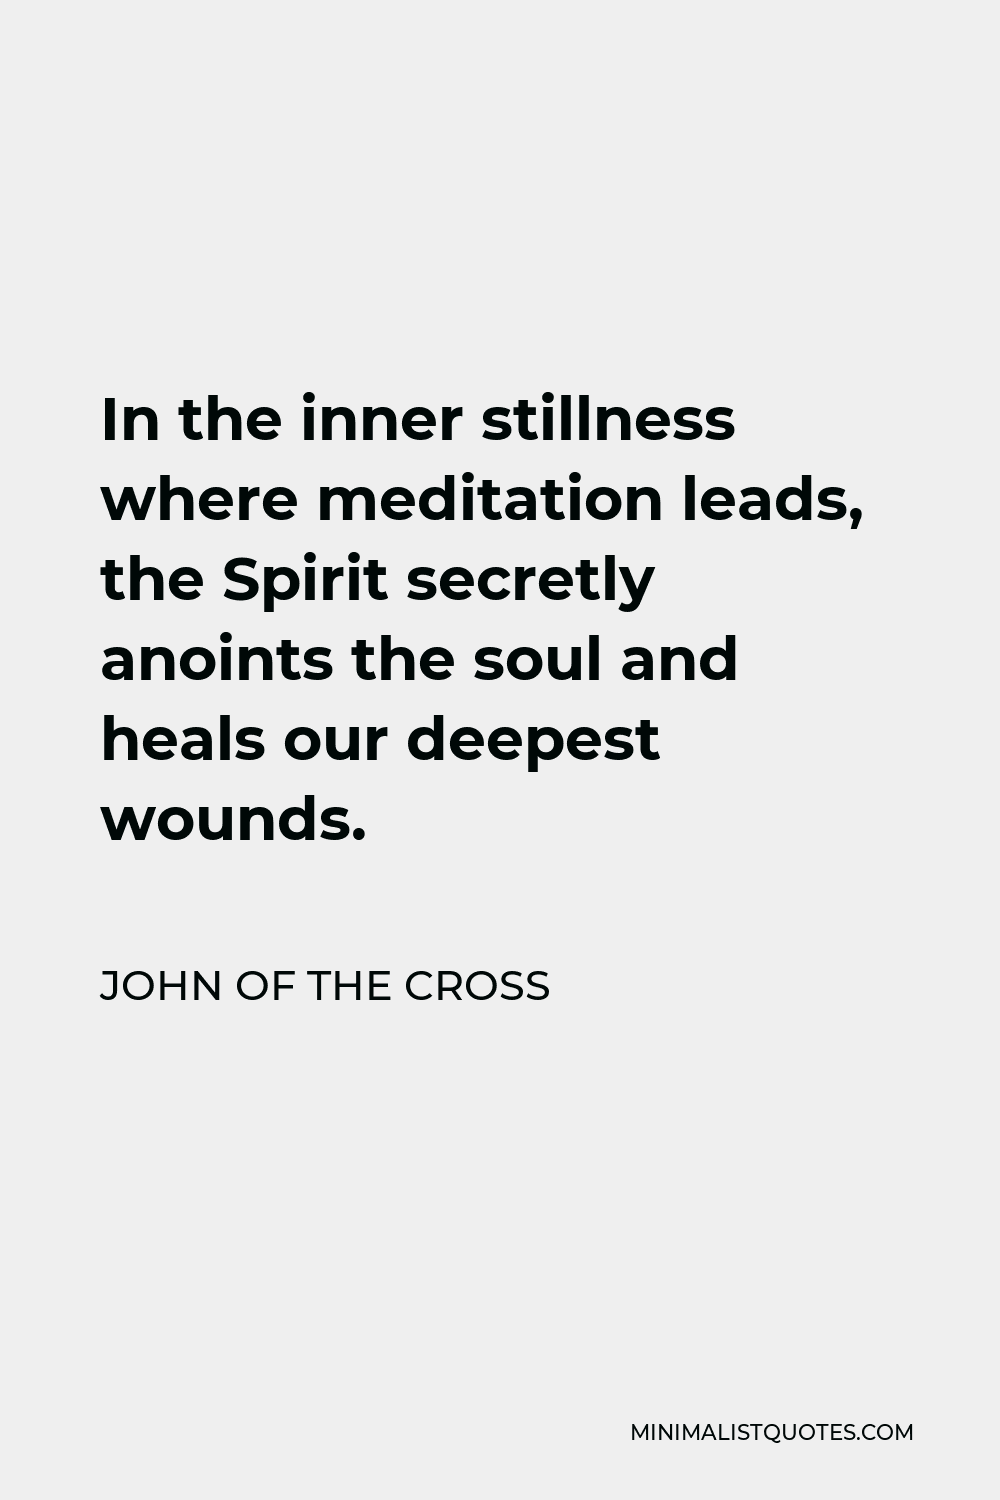 John of the Cross Quote - In the inner stillness where meditation leads, the Spirit secretly anoints the soul and heals our deepest wounds.